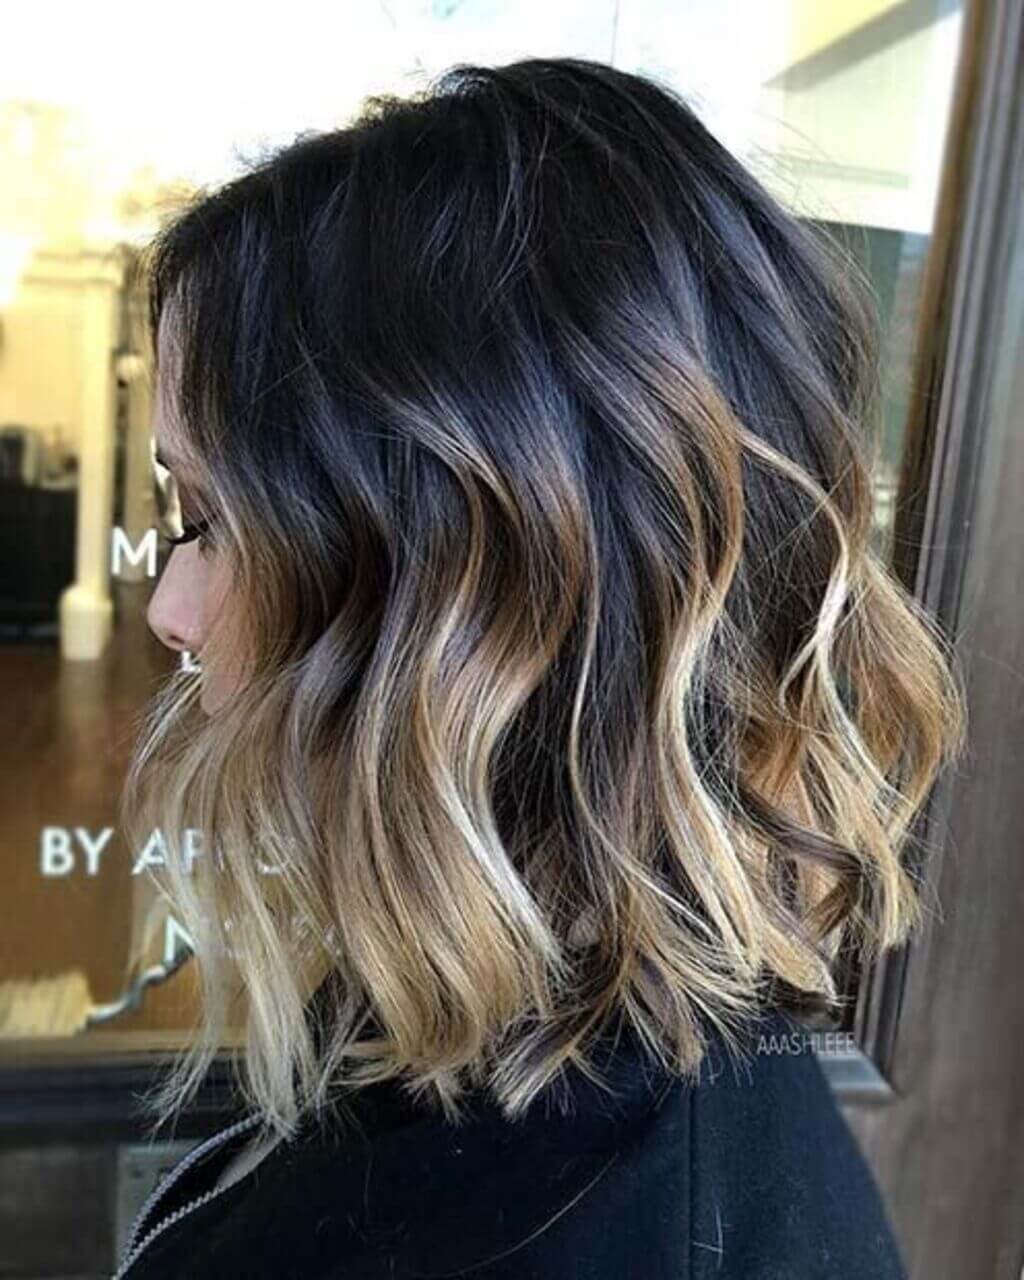 20+ Black Hair with Highlights Ideas Trending Now